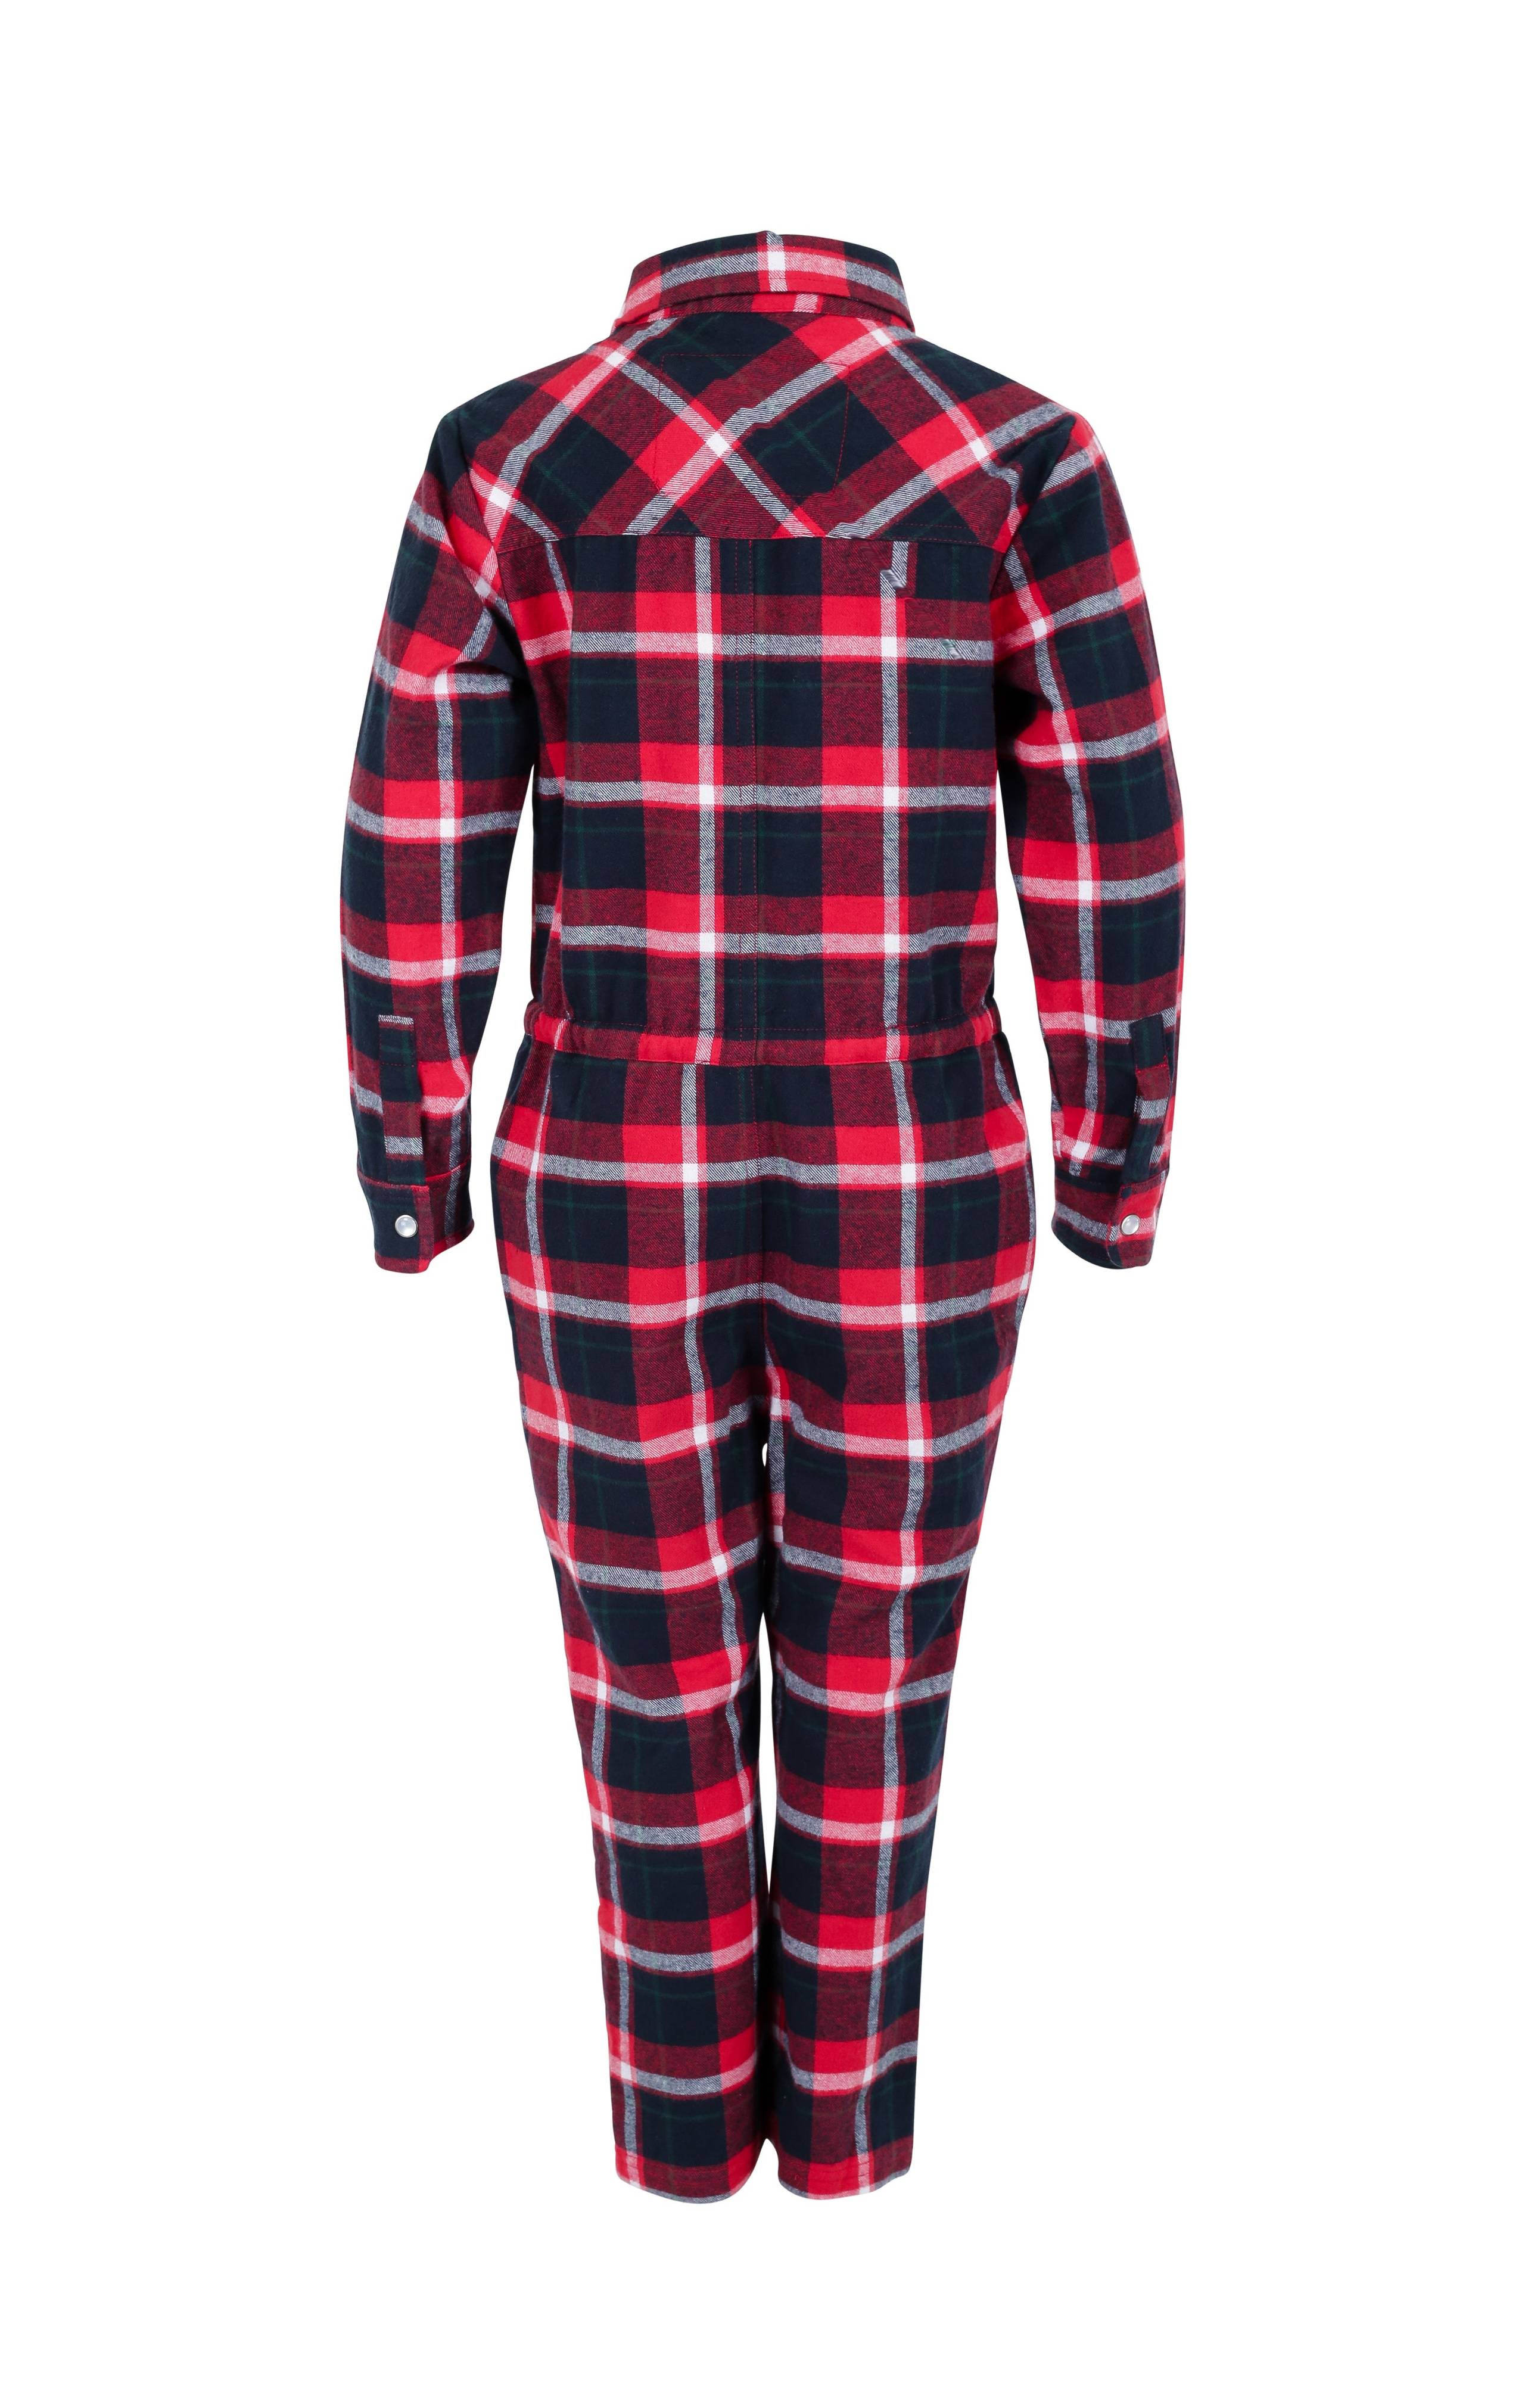 Onepiece Check Kids Jumpsuit Red / Black - 2